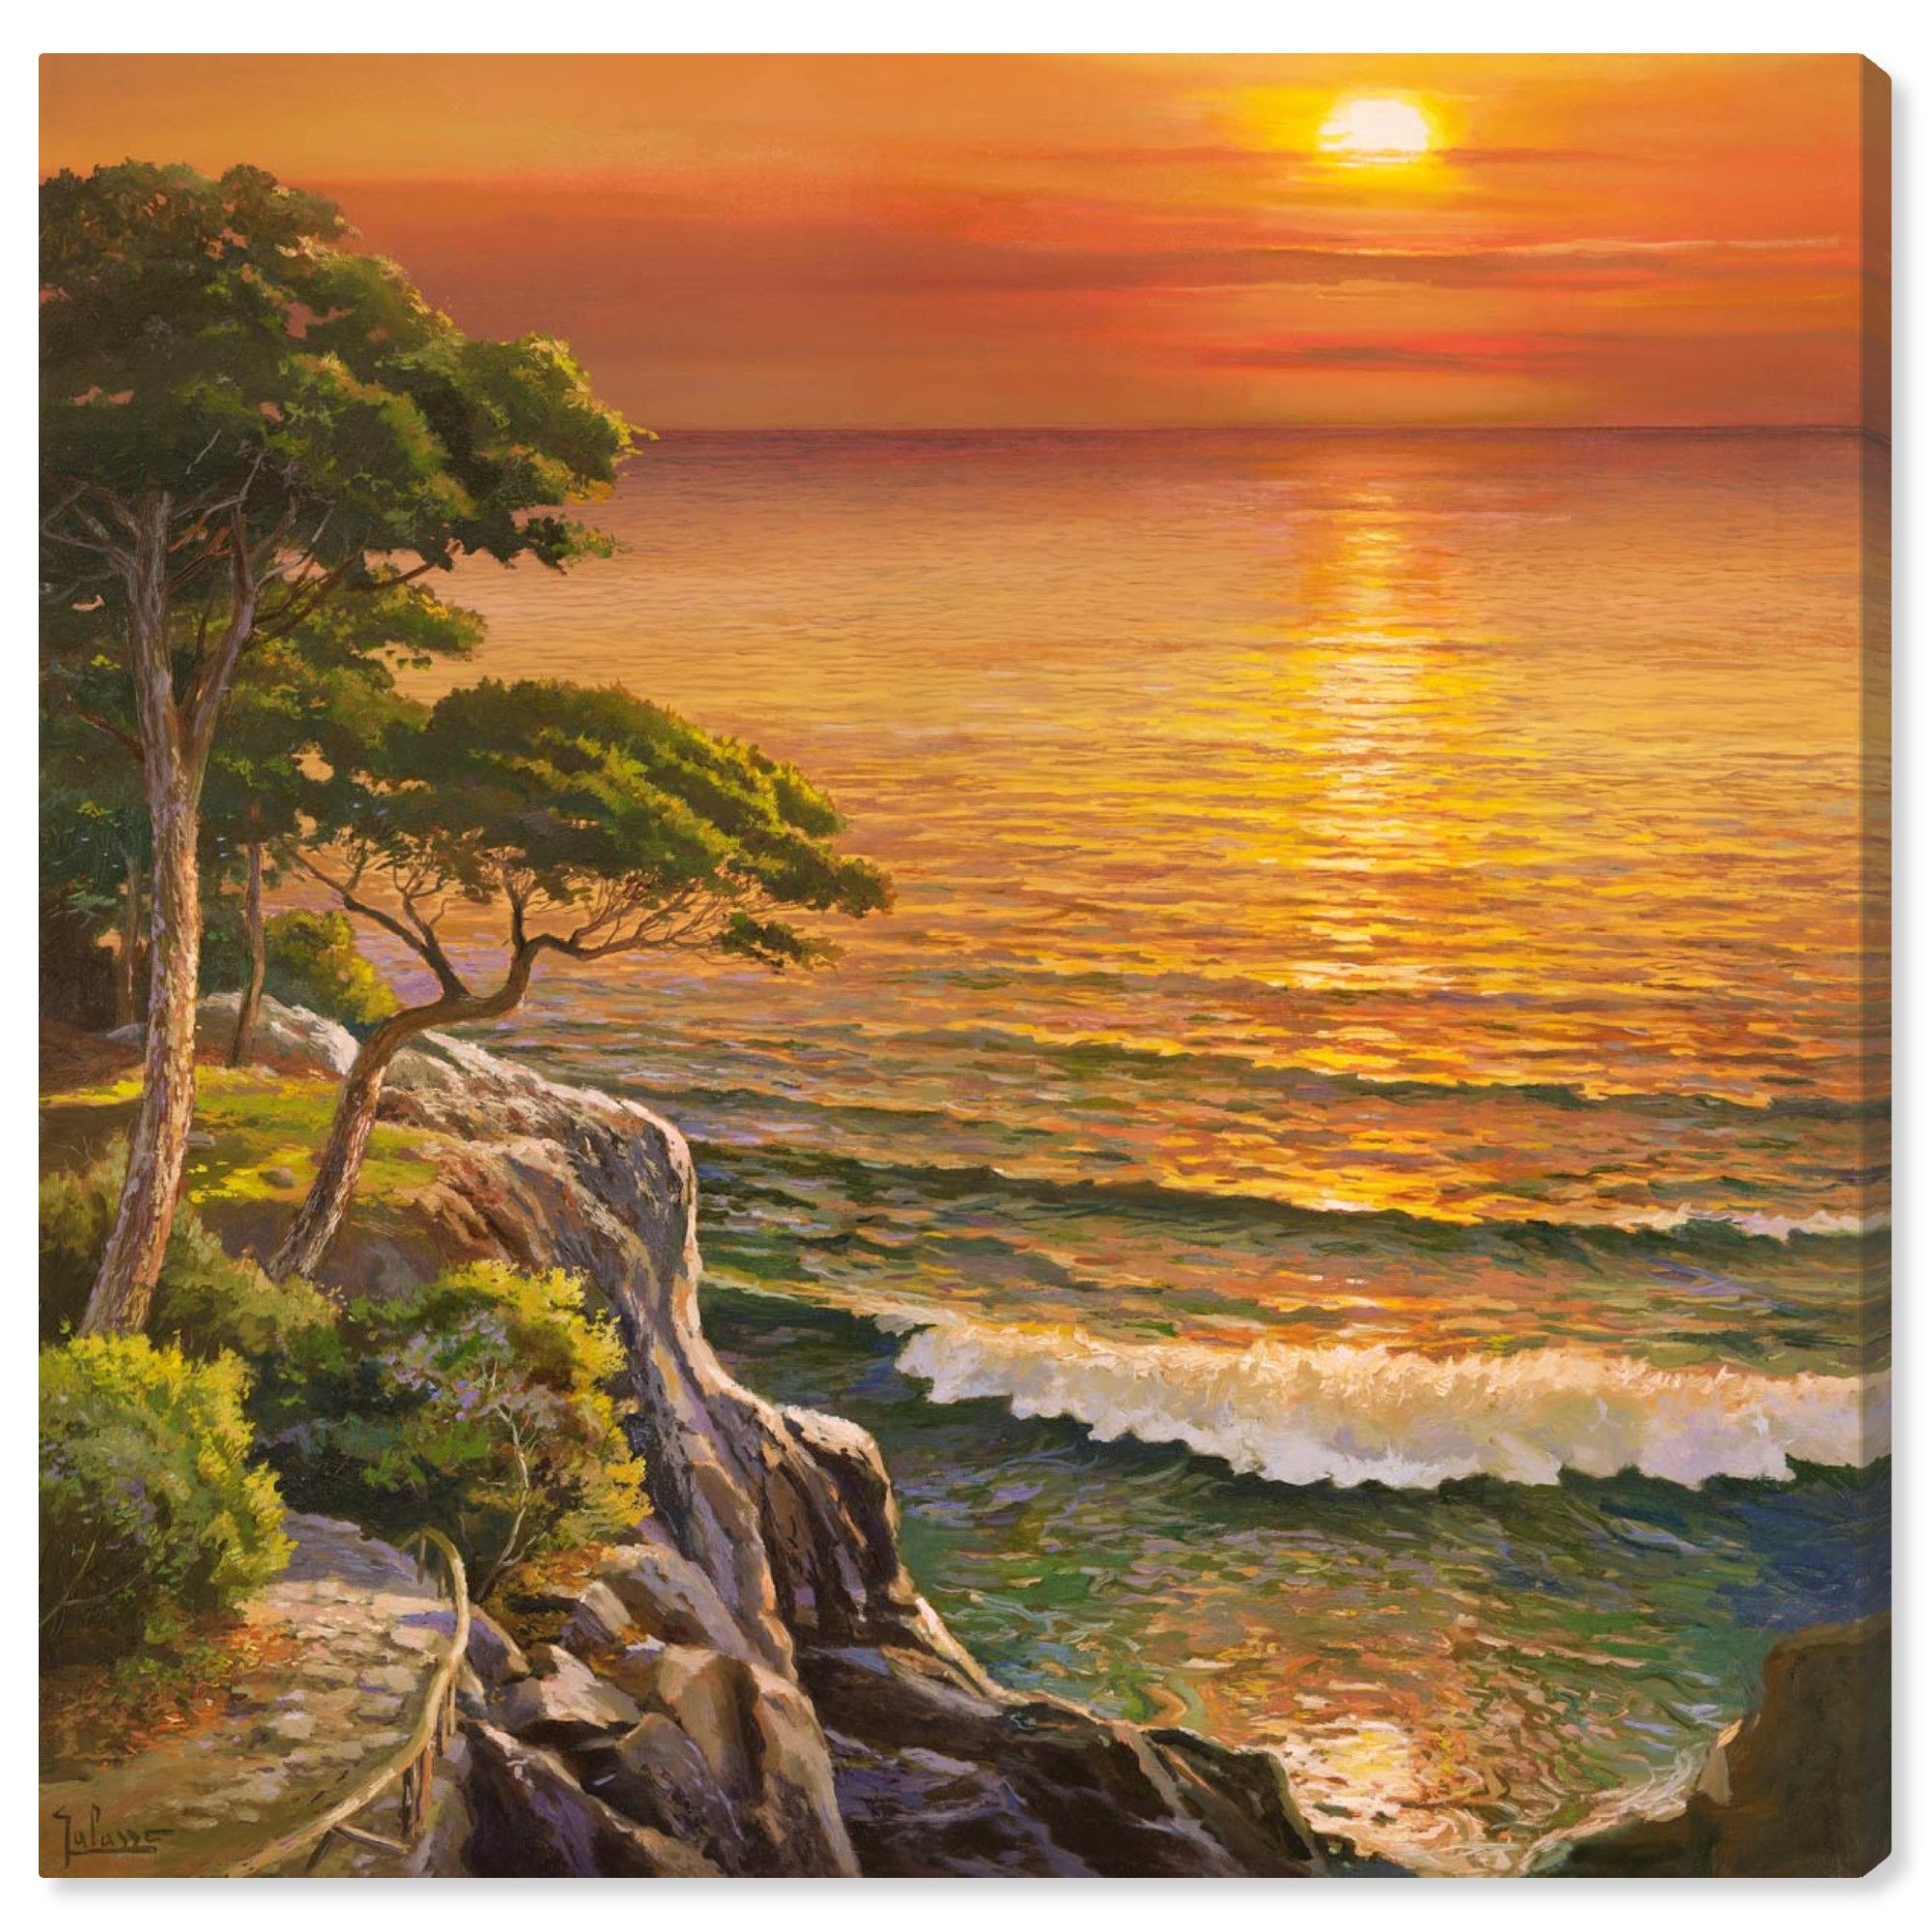 Runway Avenue Nature And Landscape Wall Art Canvas Prints 'sai – Sunset  Visage 1ad2552' Sunrise And Sunsets – Orange, Green – Walmart For Most Up To Date Sunset Landscape Wall Art (Gallery 20 of 20)